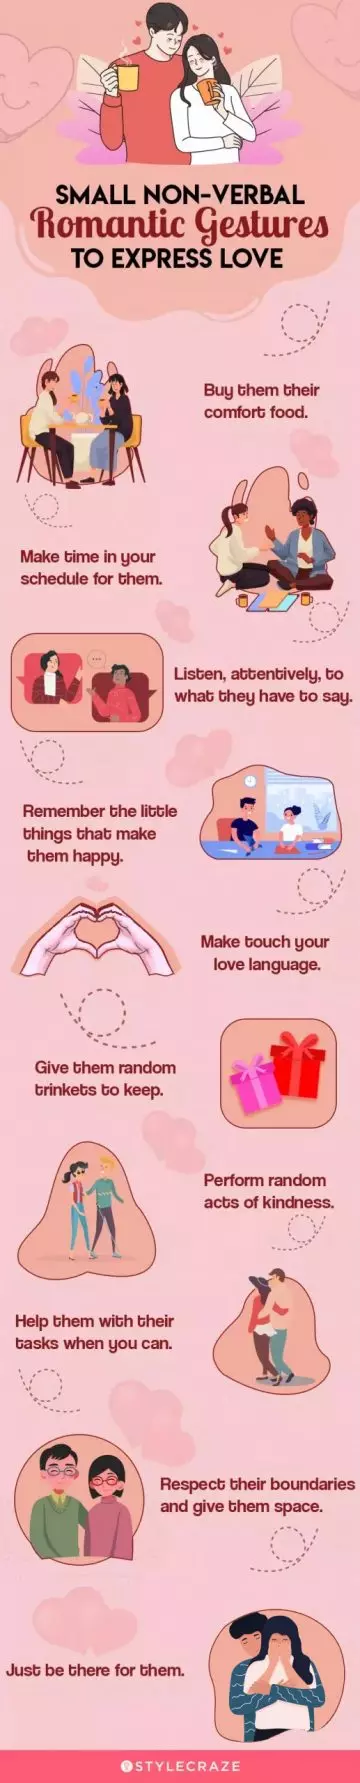 small non verbal romantic gestures to express love (infographic)